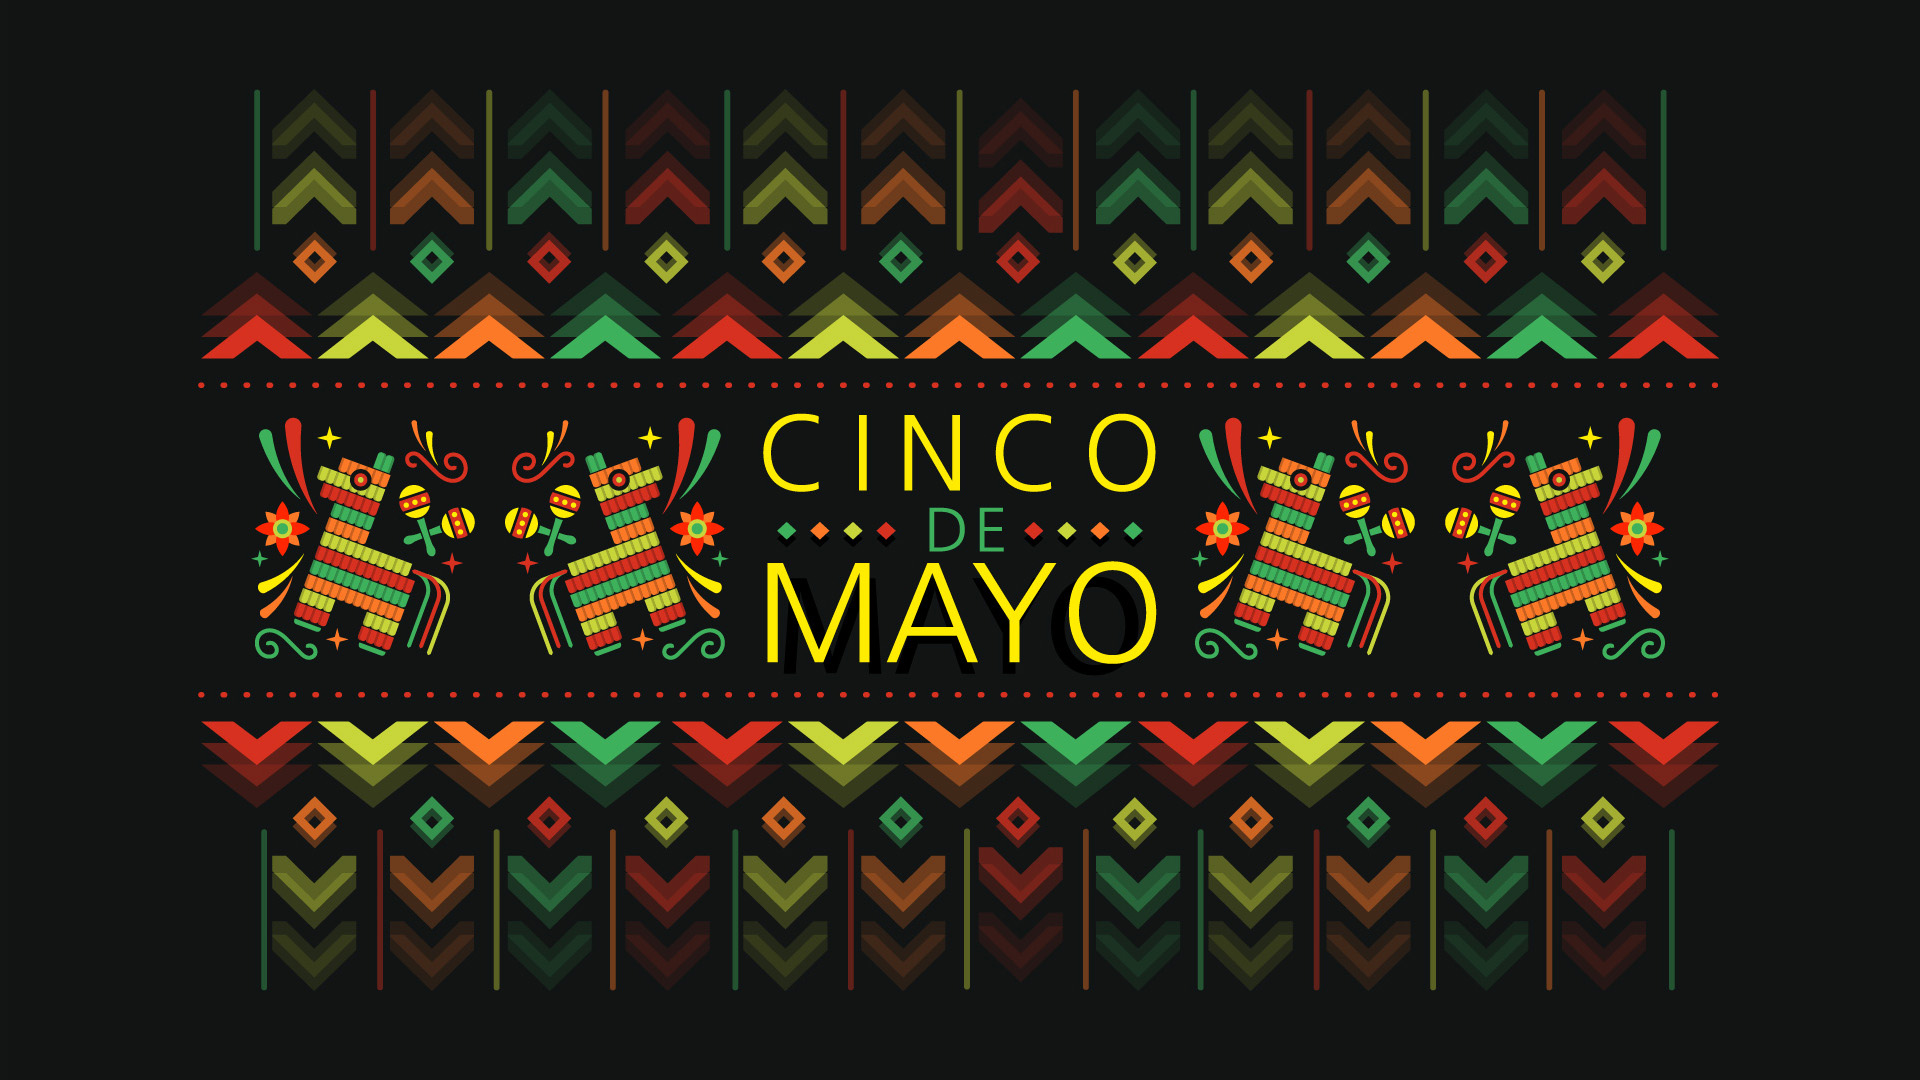 Black background with linear tribal red, yellow, orange, and green pattern reflected on the top and bottom of the graphic. Center part of the graphic reads Cinco de Mayo with 2 pinatas on each side.